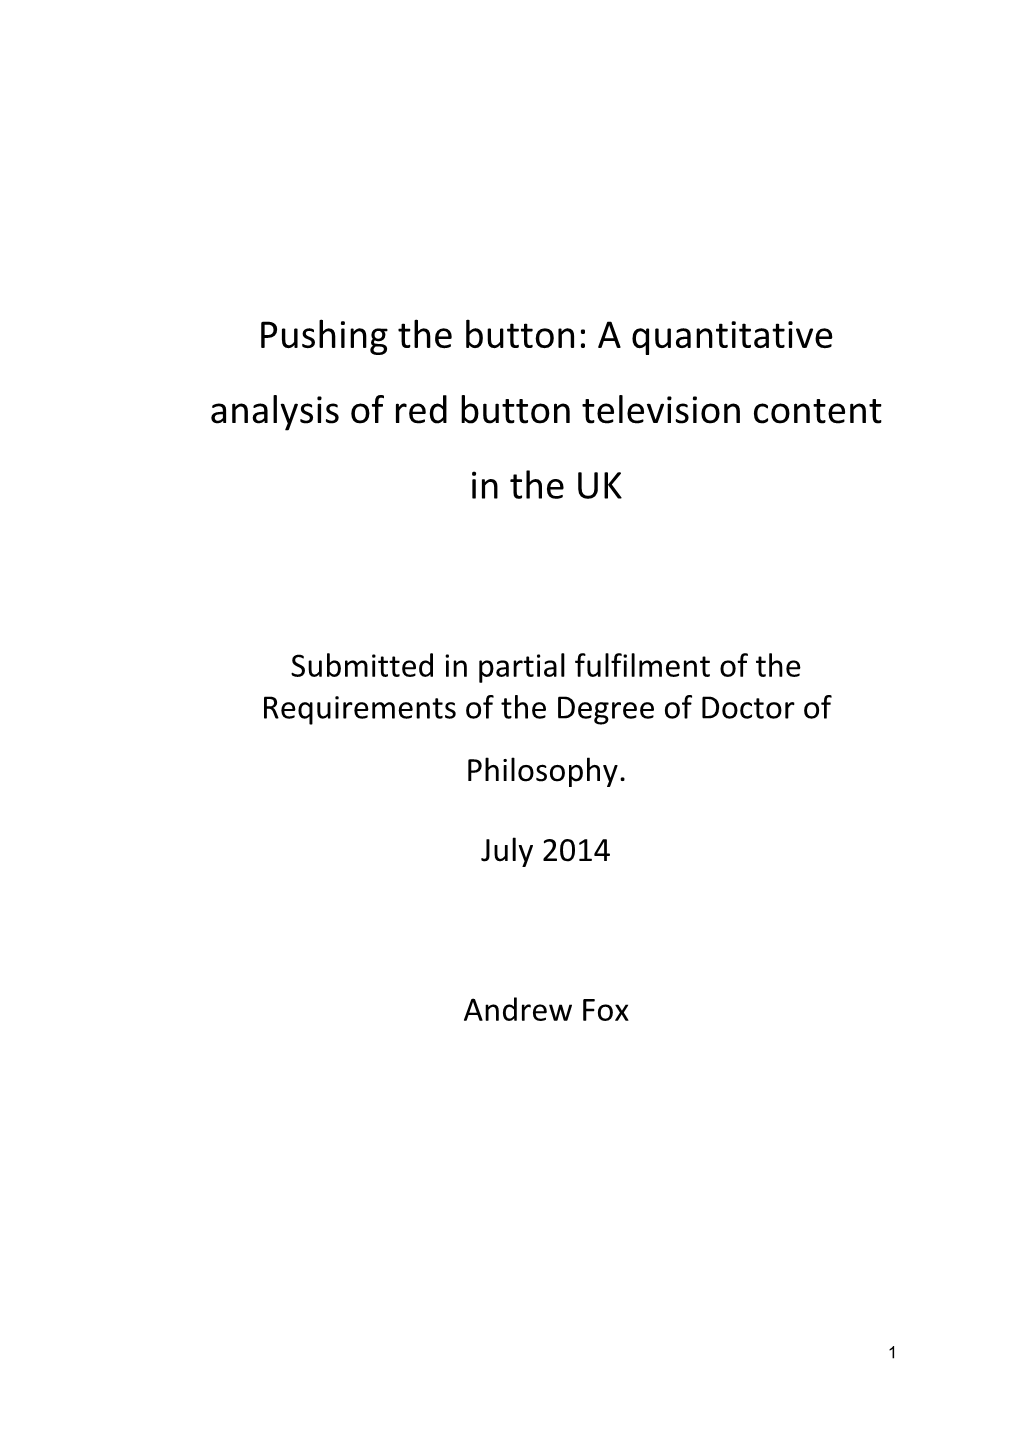 A Quantitative Analysis of Red Button Television Content in the UK